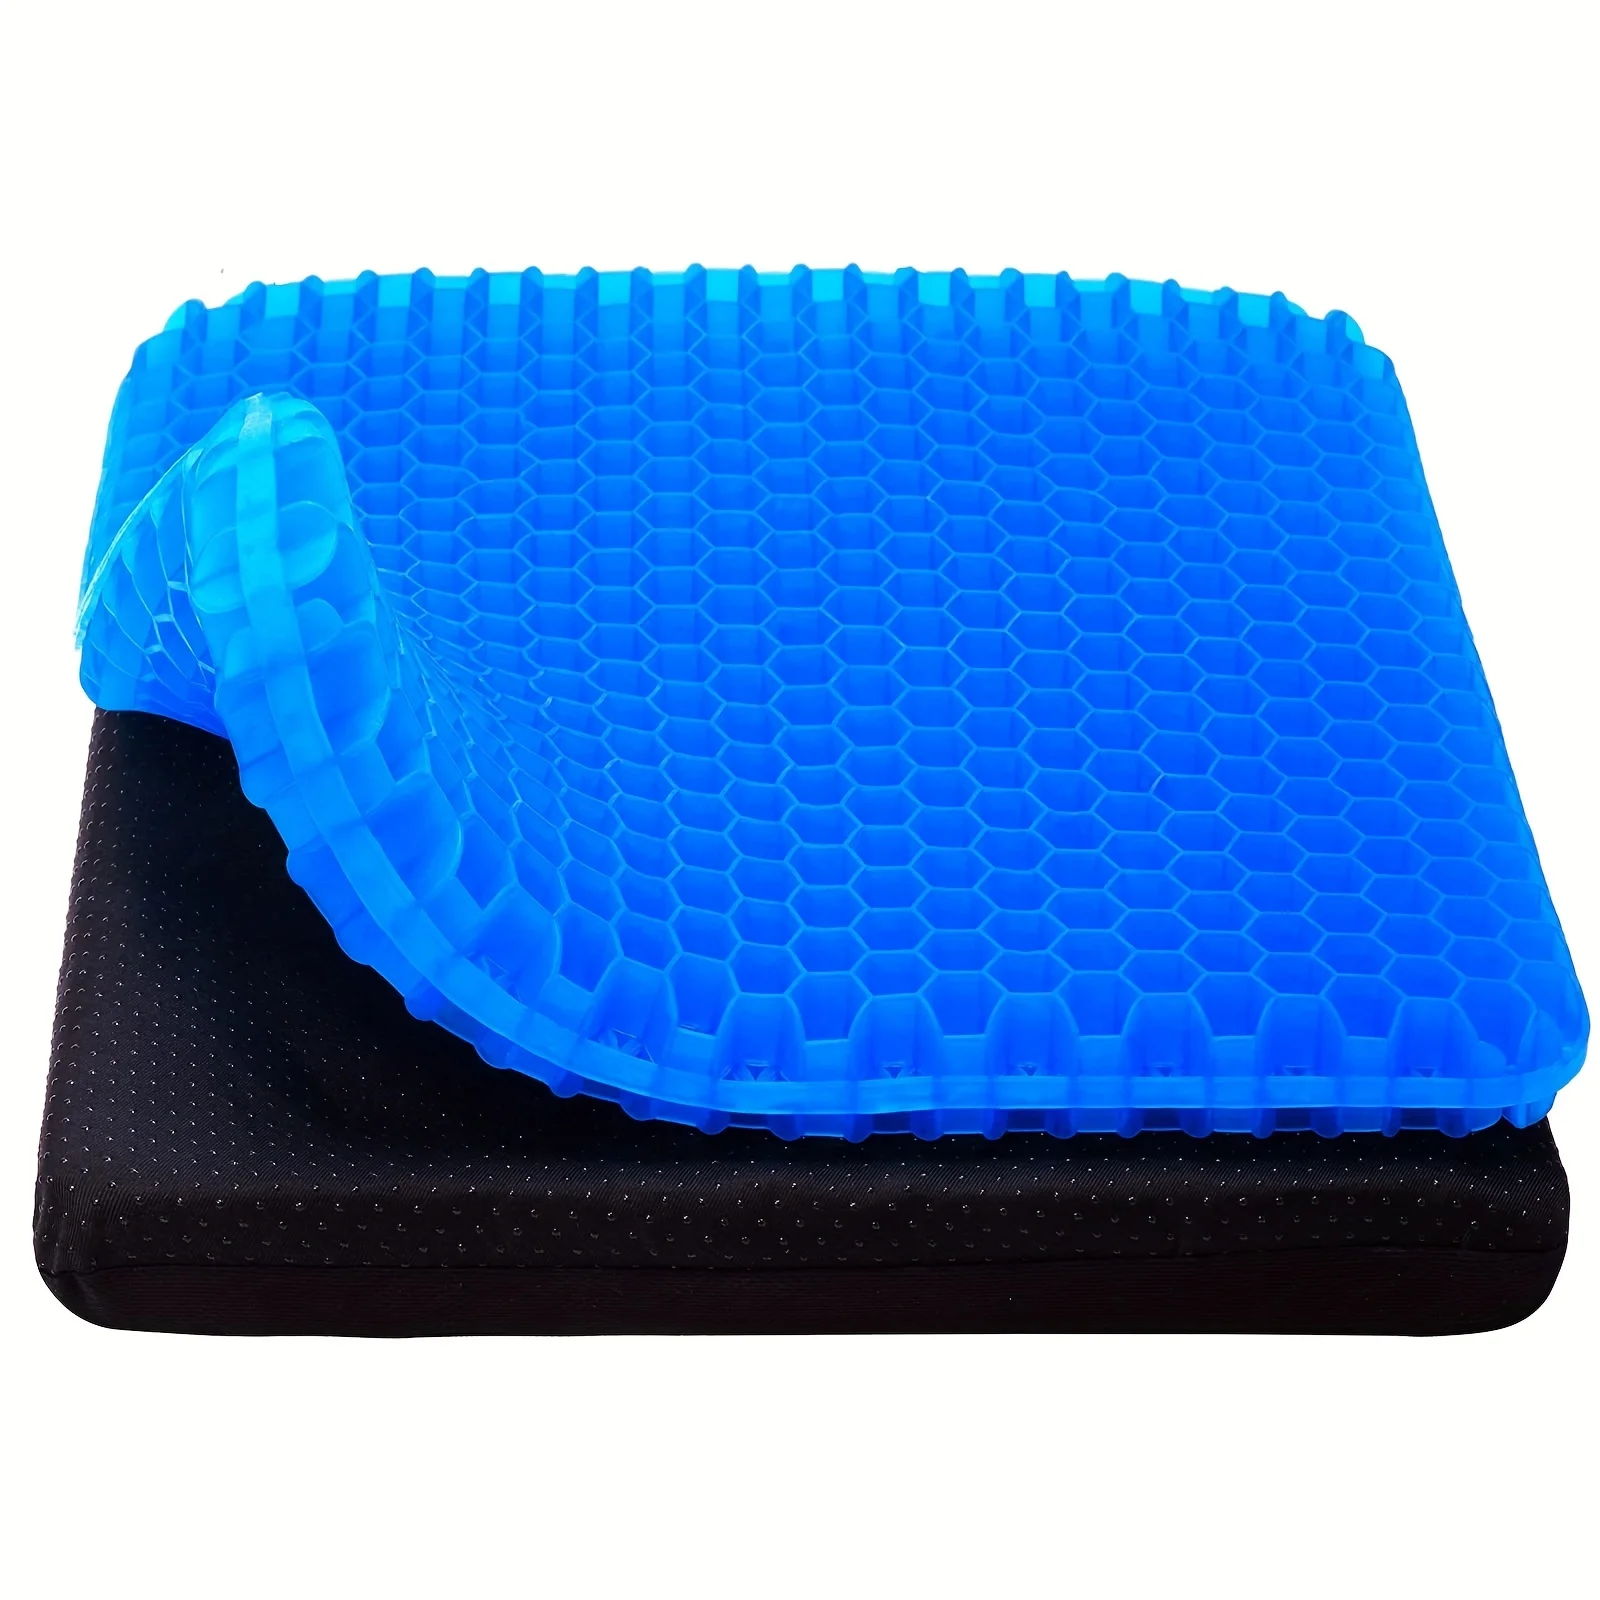 Cooling Gel Seat Cushion with Non-Slip Cover: Honeycomb Design for Maximum - $27.18